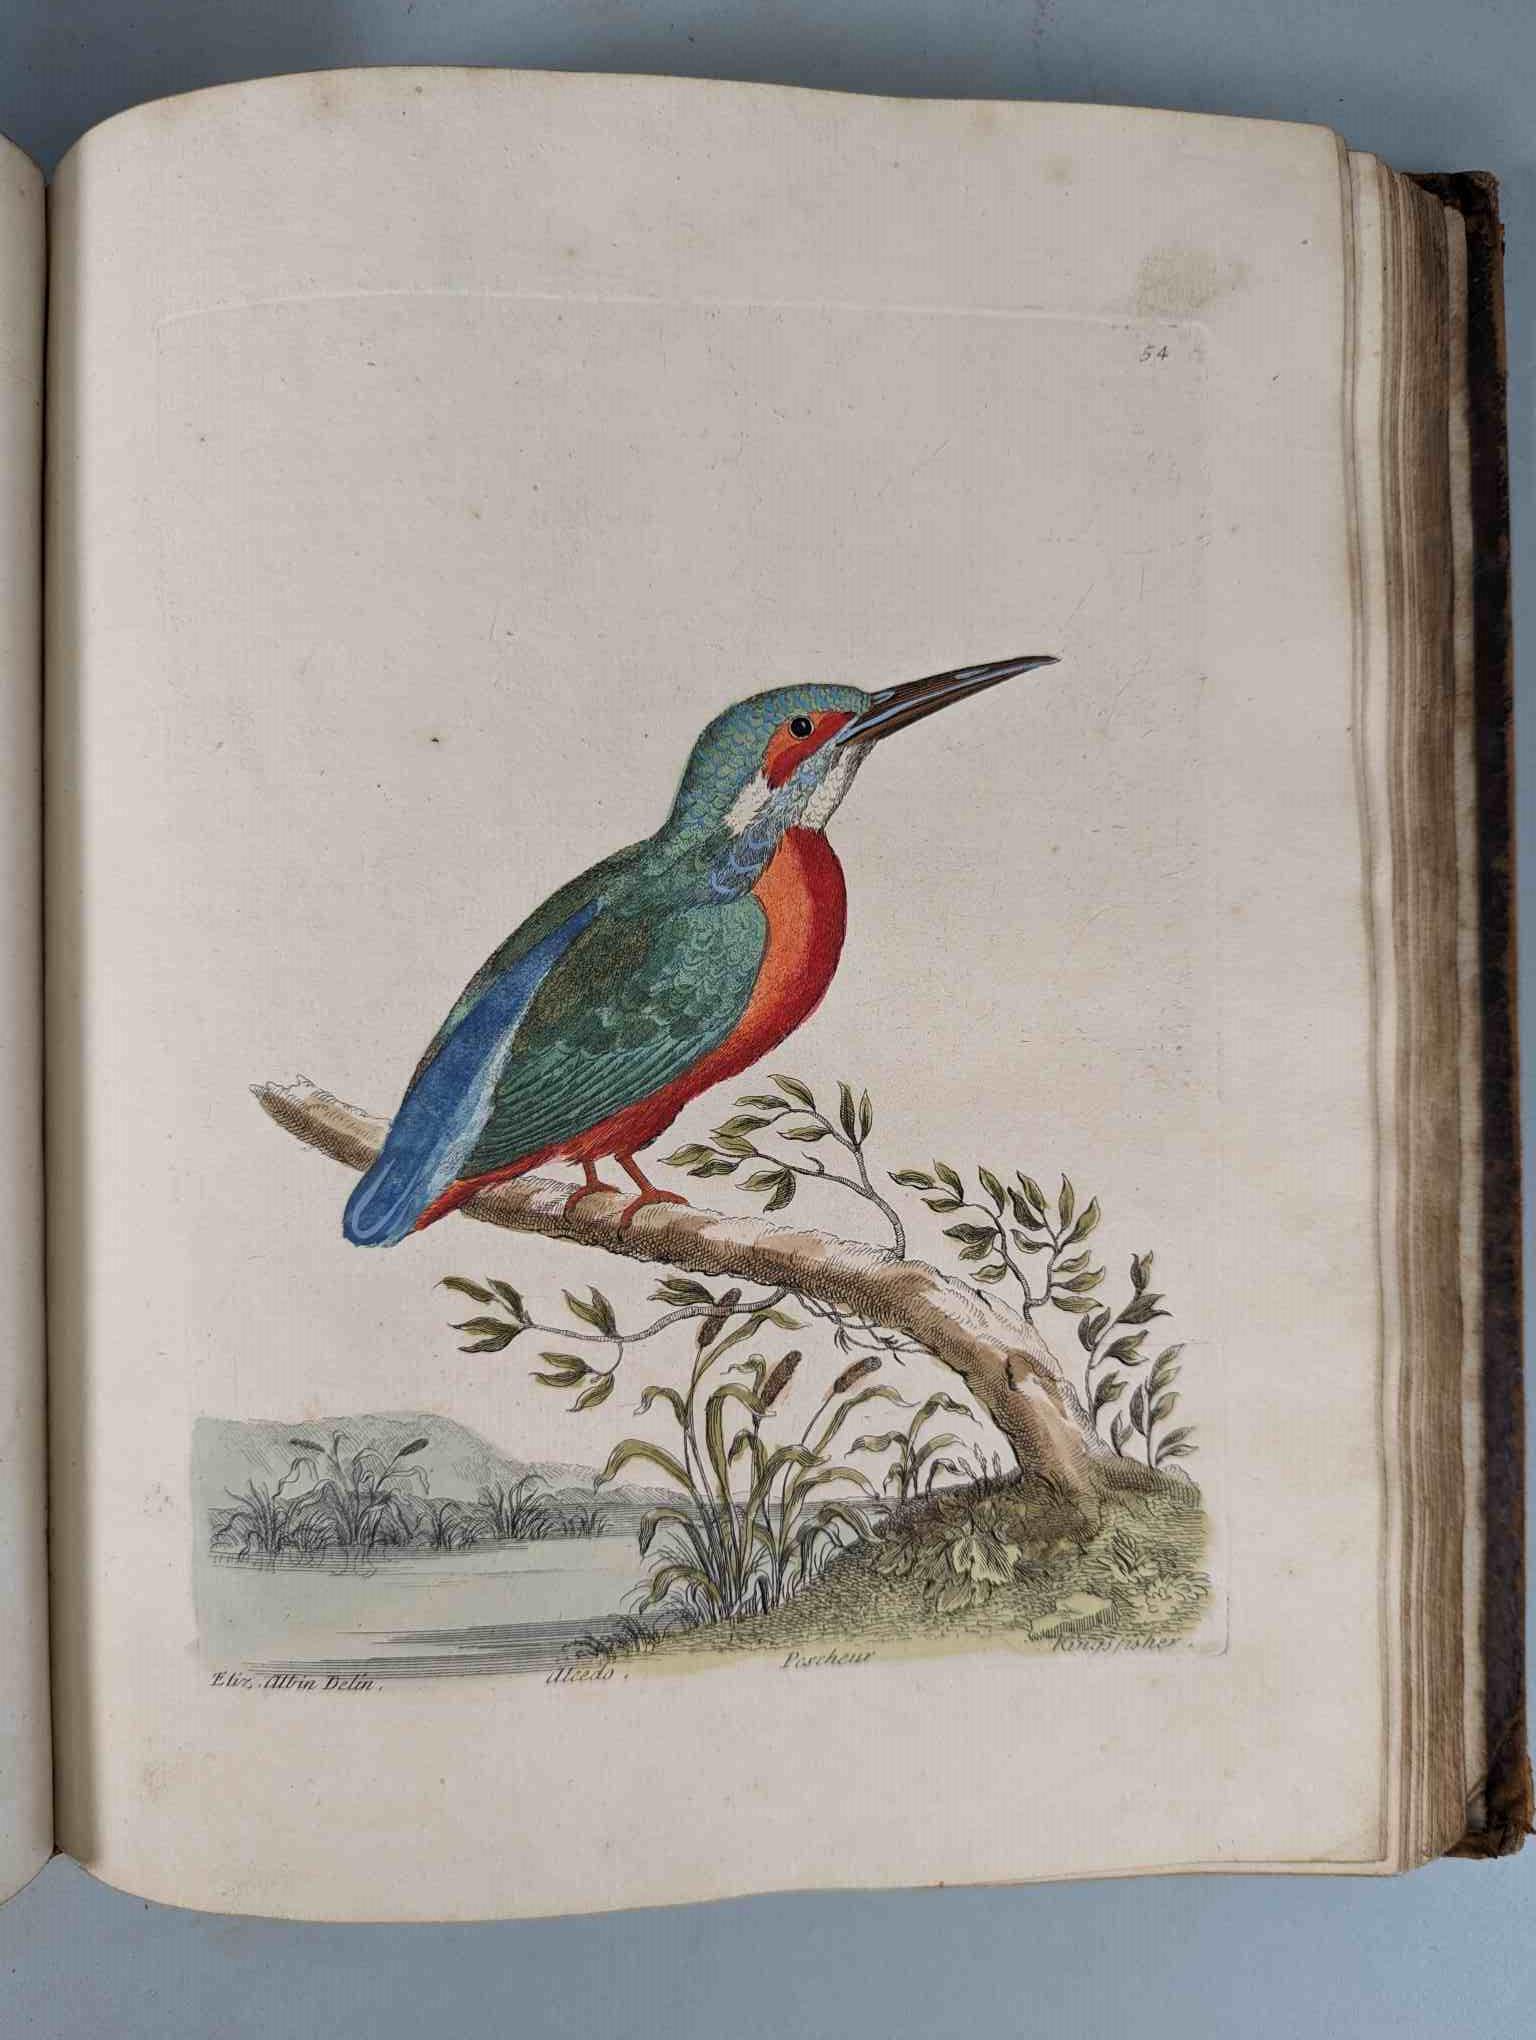 ALBIN, Eleazar. A Natural History of Birds, to which are added, Notes and Observations by W. - Image 57 of 208